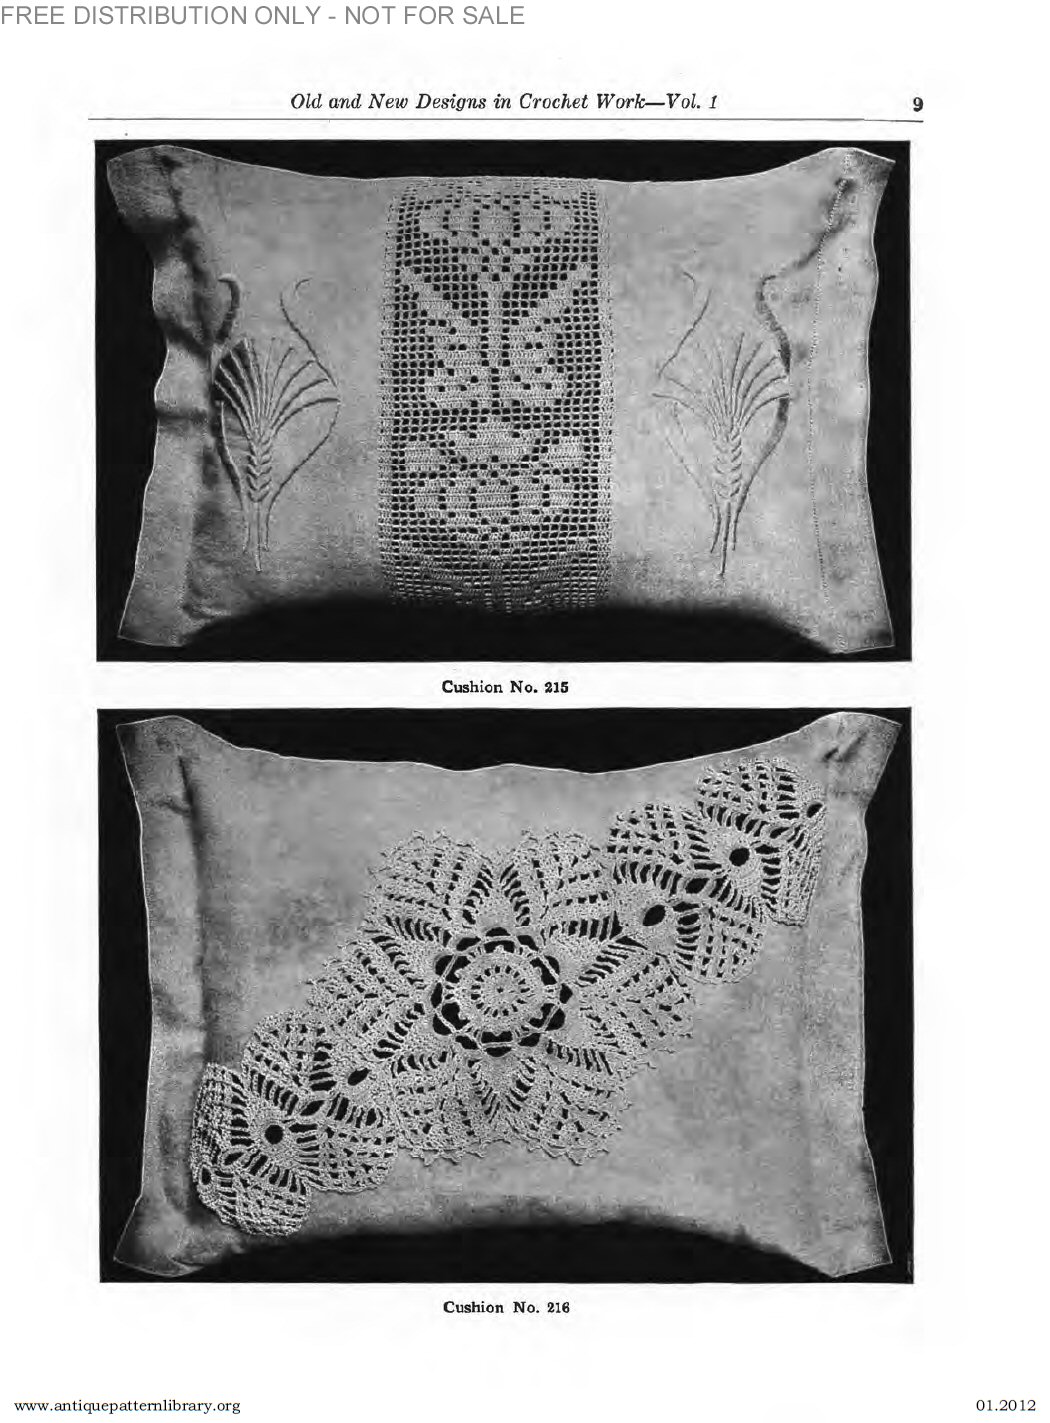 B-SW070 Old and New Designs in Crochet Work, 